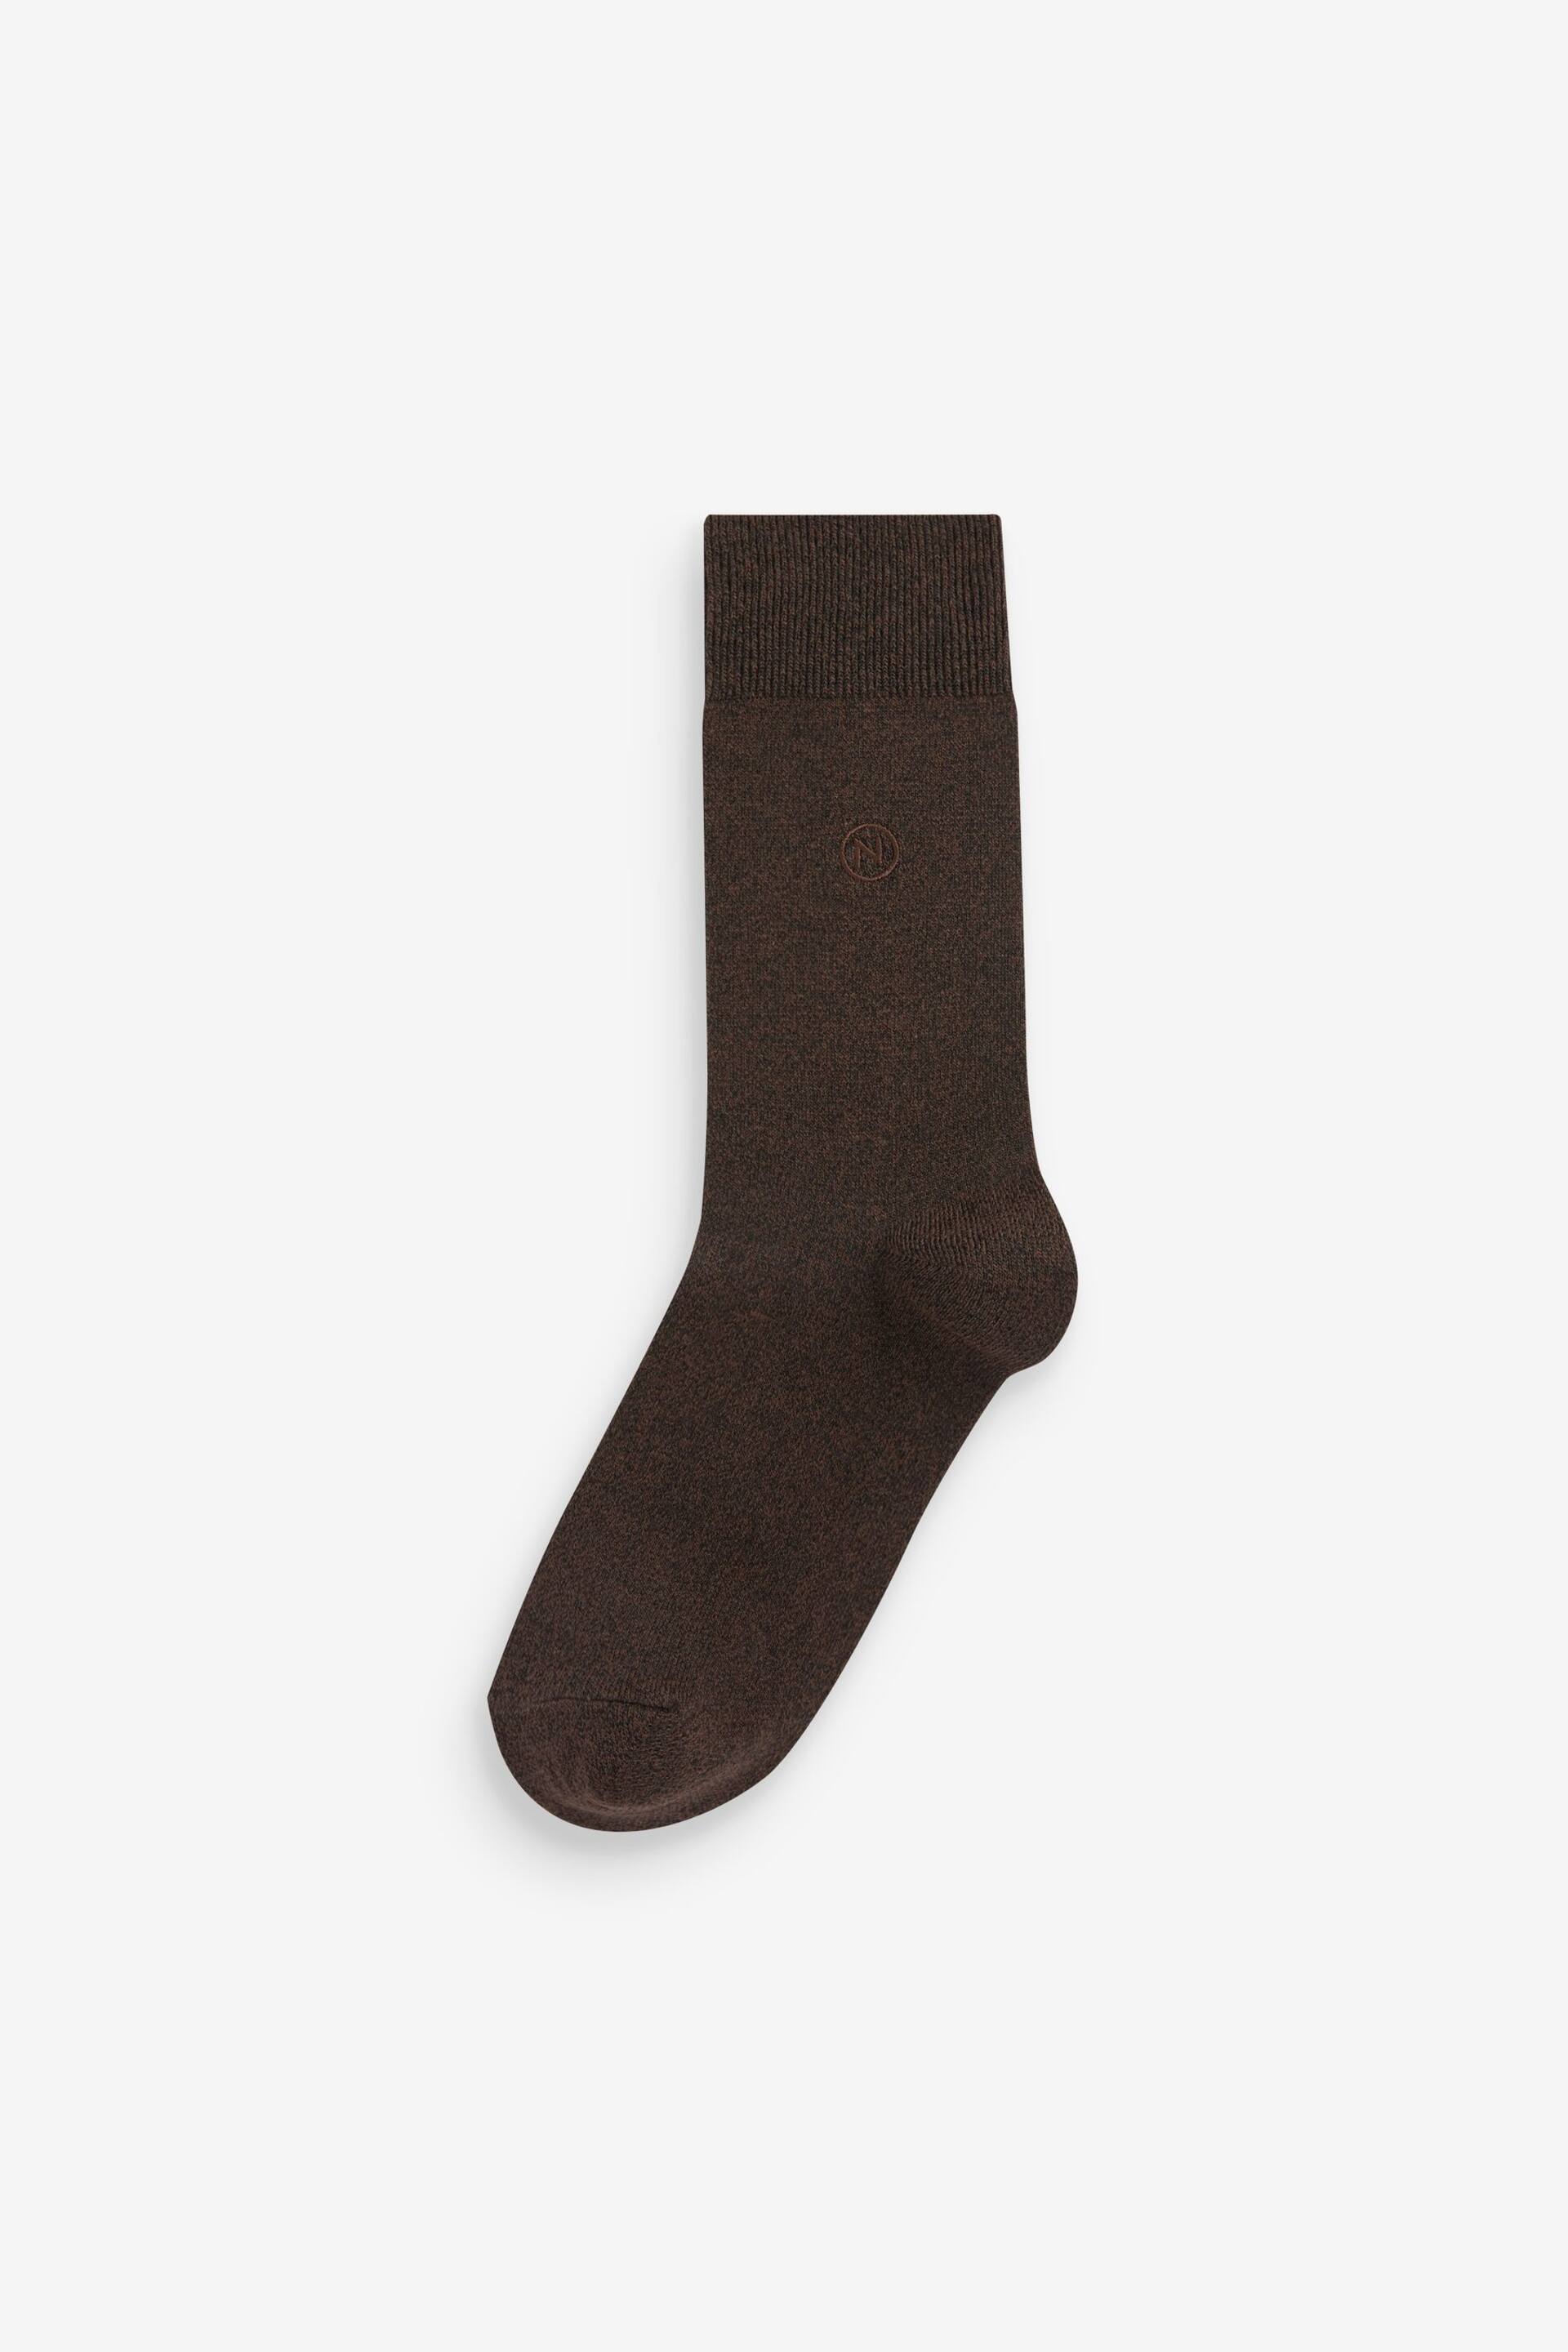 Neutrals 10 Pack Embroidered Lasting Fresh Socks - Image 3 of 14